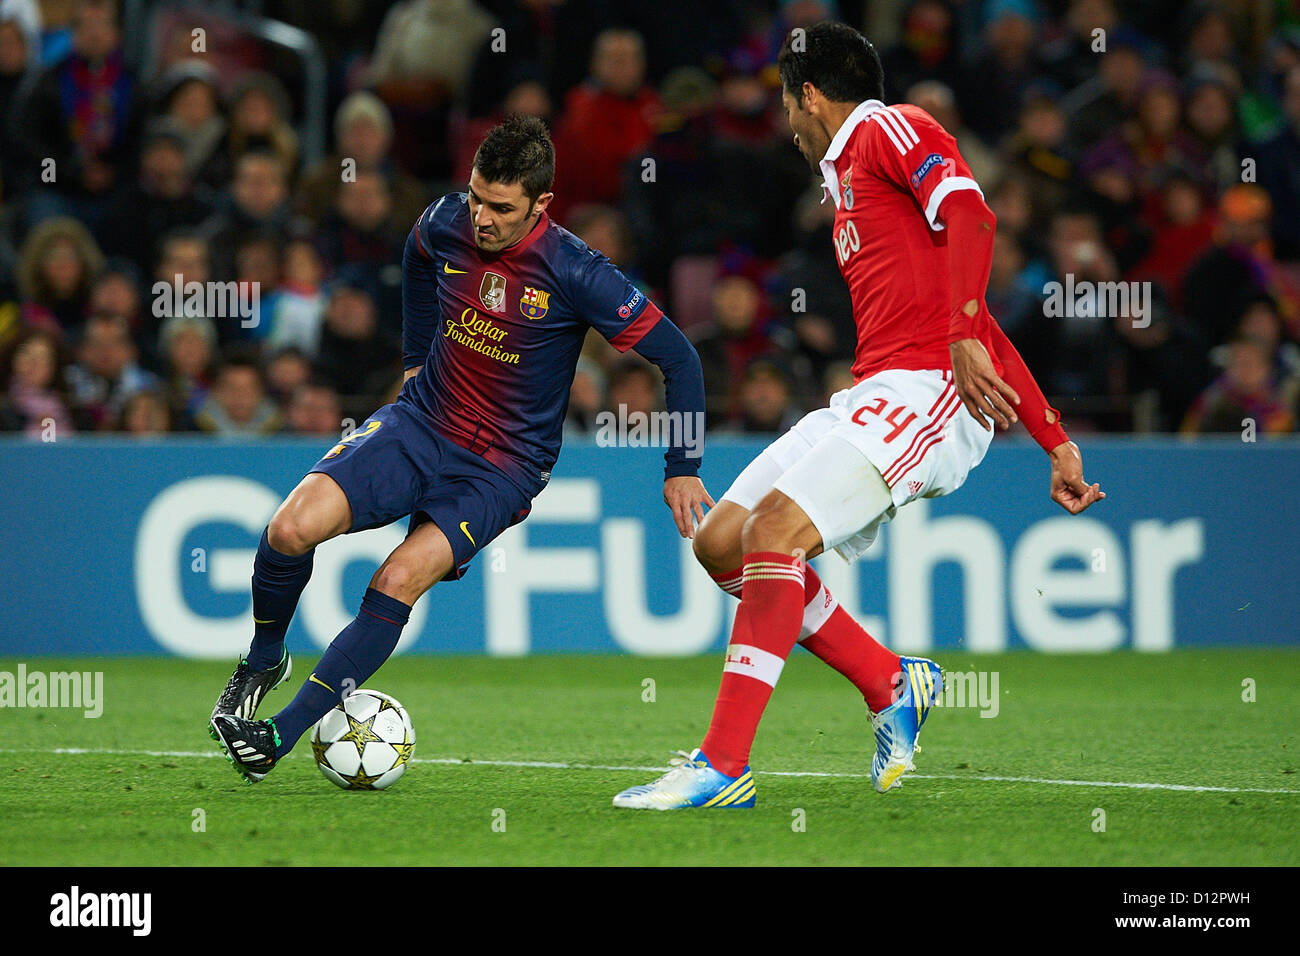 David Villa (FC Barcelona) duels for the ball against Ezequiel Garay (SL Benfica), during the Champions League soccer match between FC Barcelona and SL Benfica, at the Camp Nou stadium in Barcelona, Spain, wednesday, december. 5, 2012. Foto: S.Lau Stock Photo